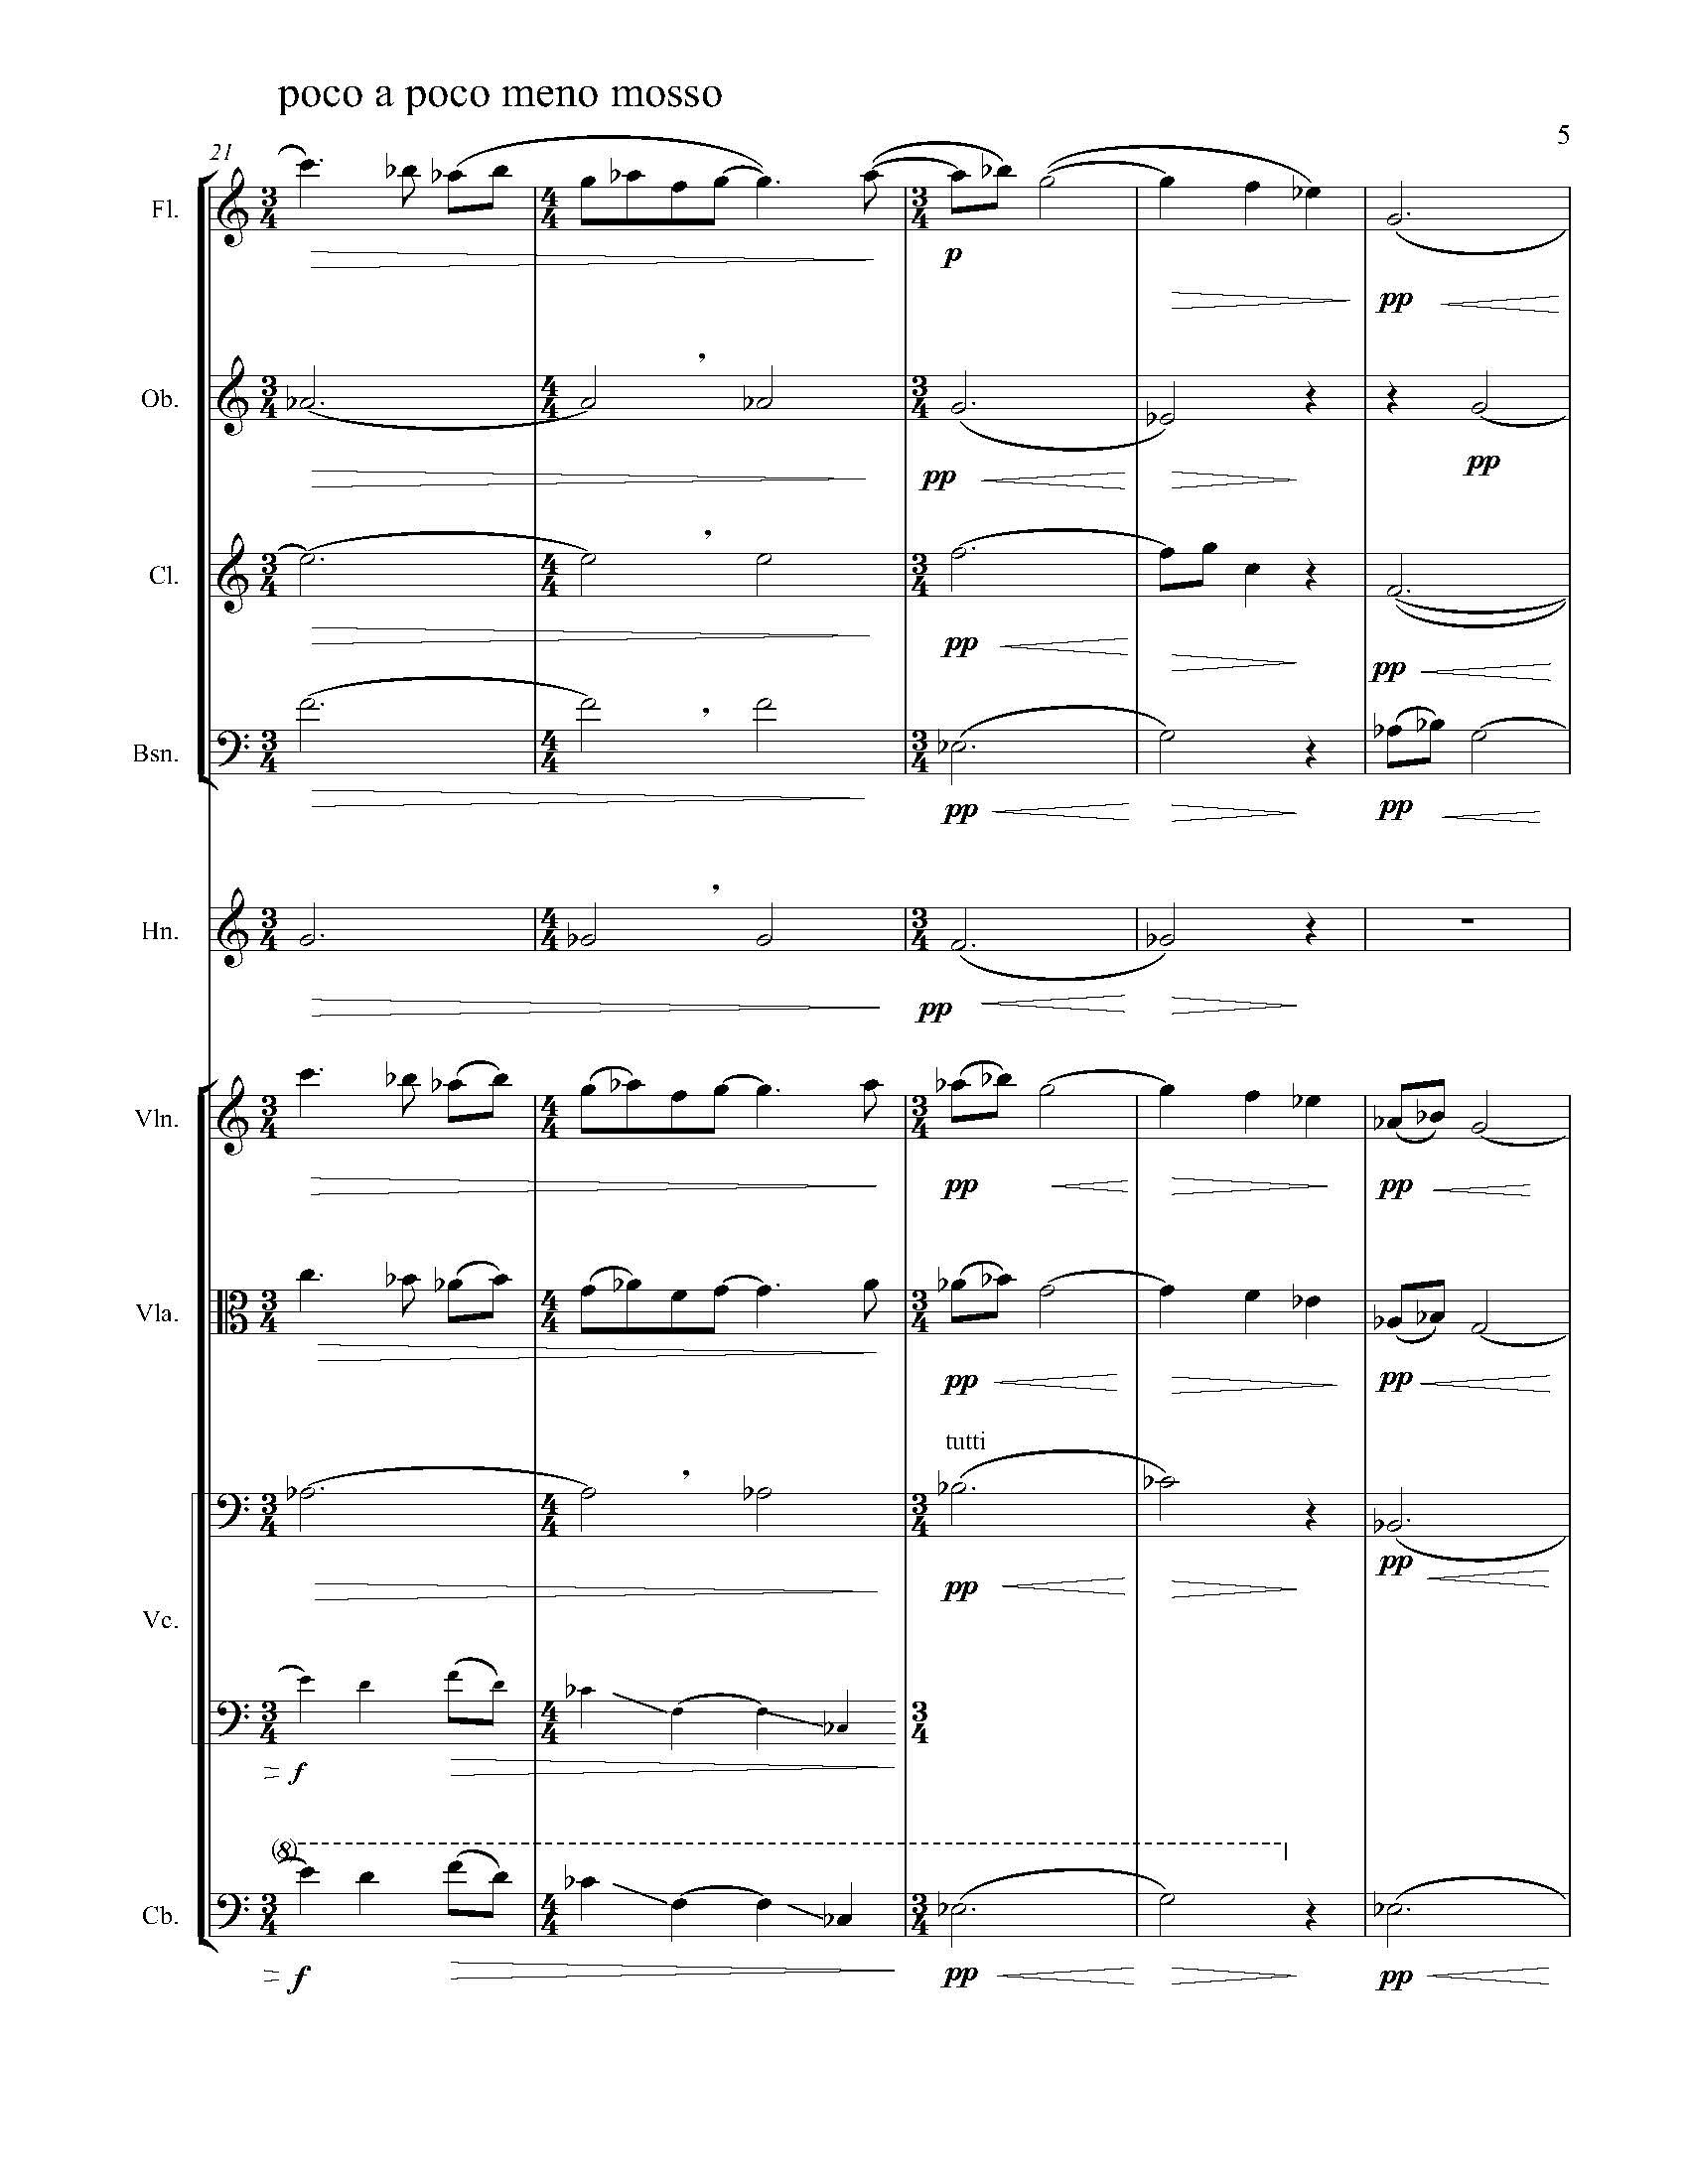 In Search of a Bird - Complete Score_Page_11.jpg